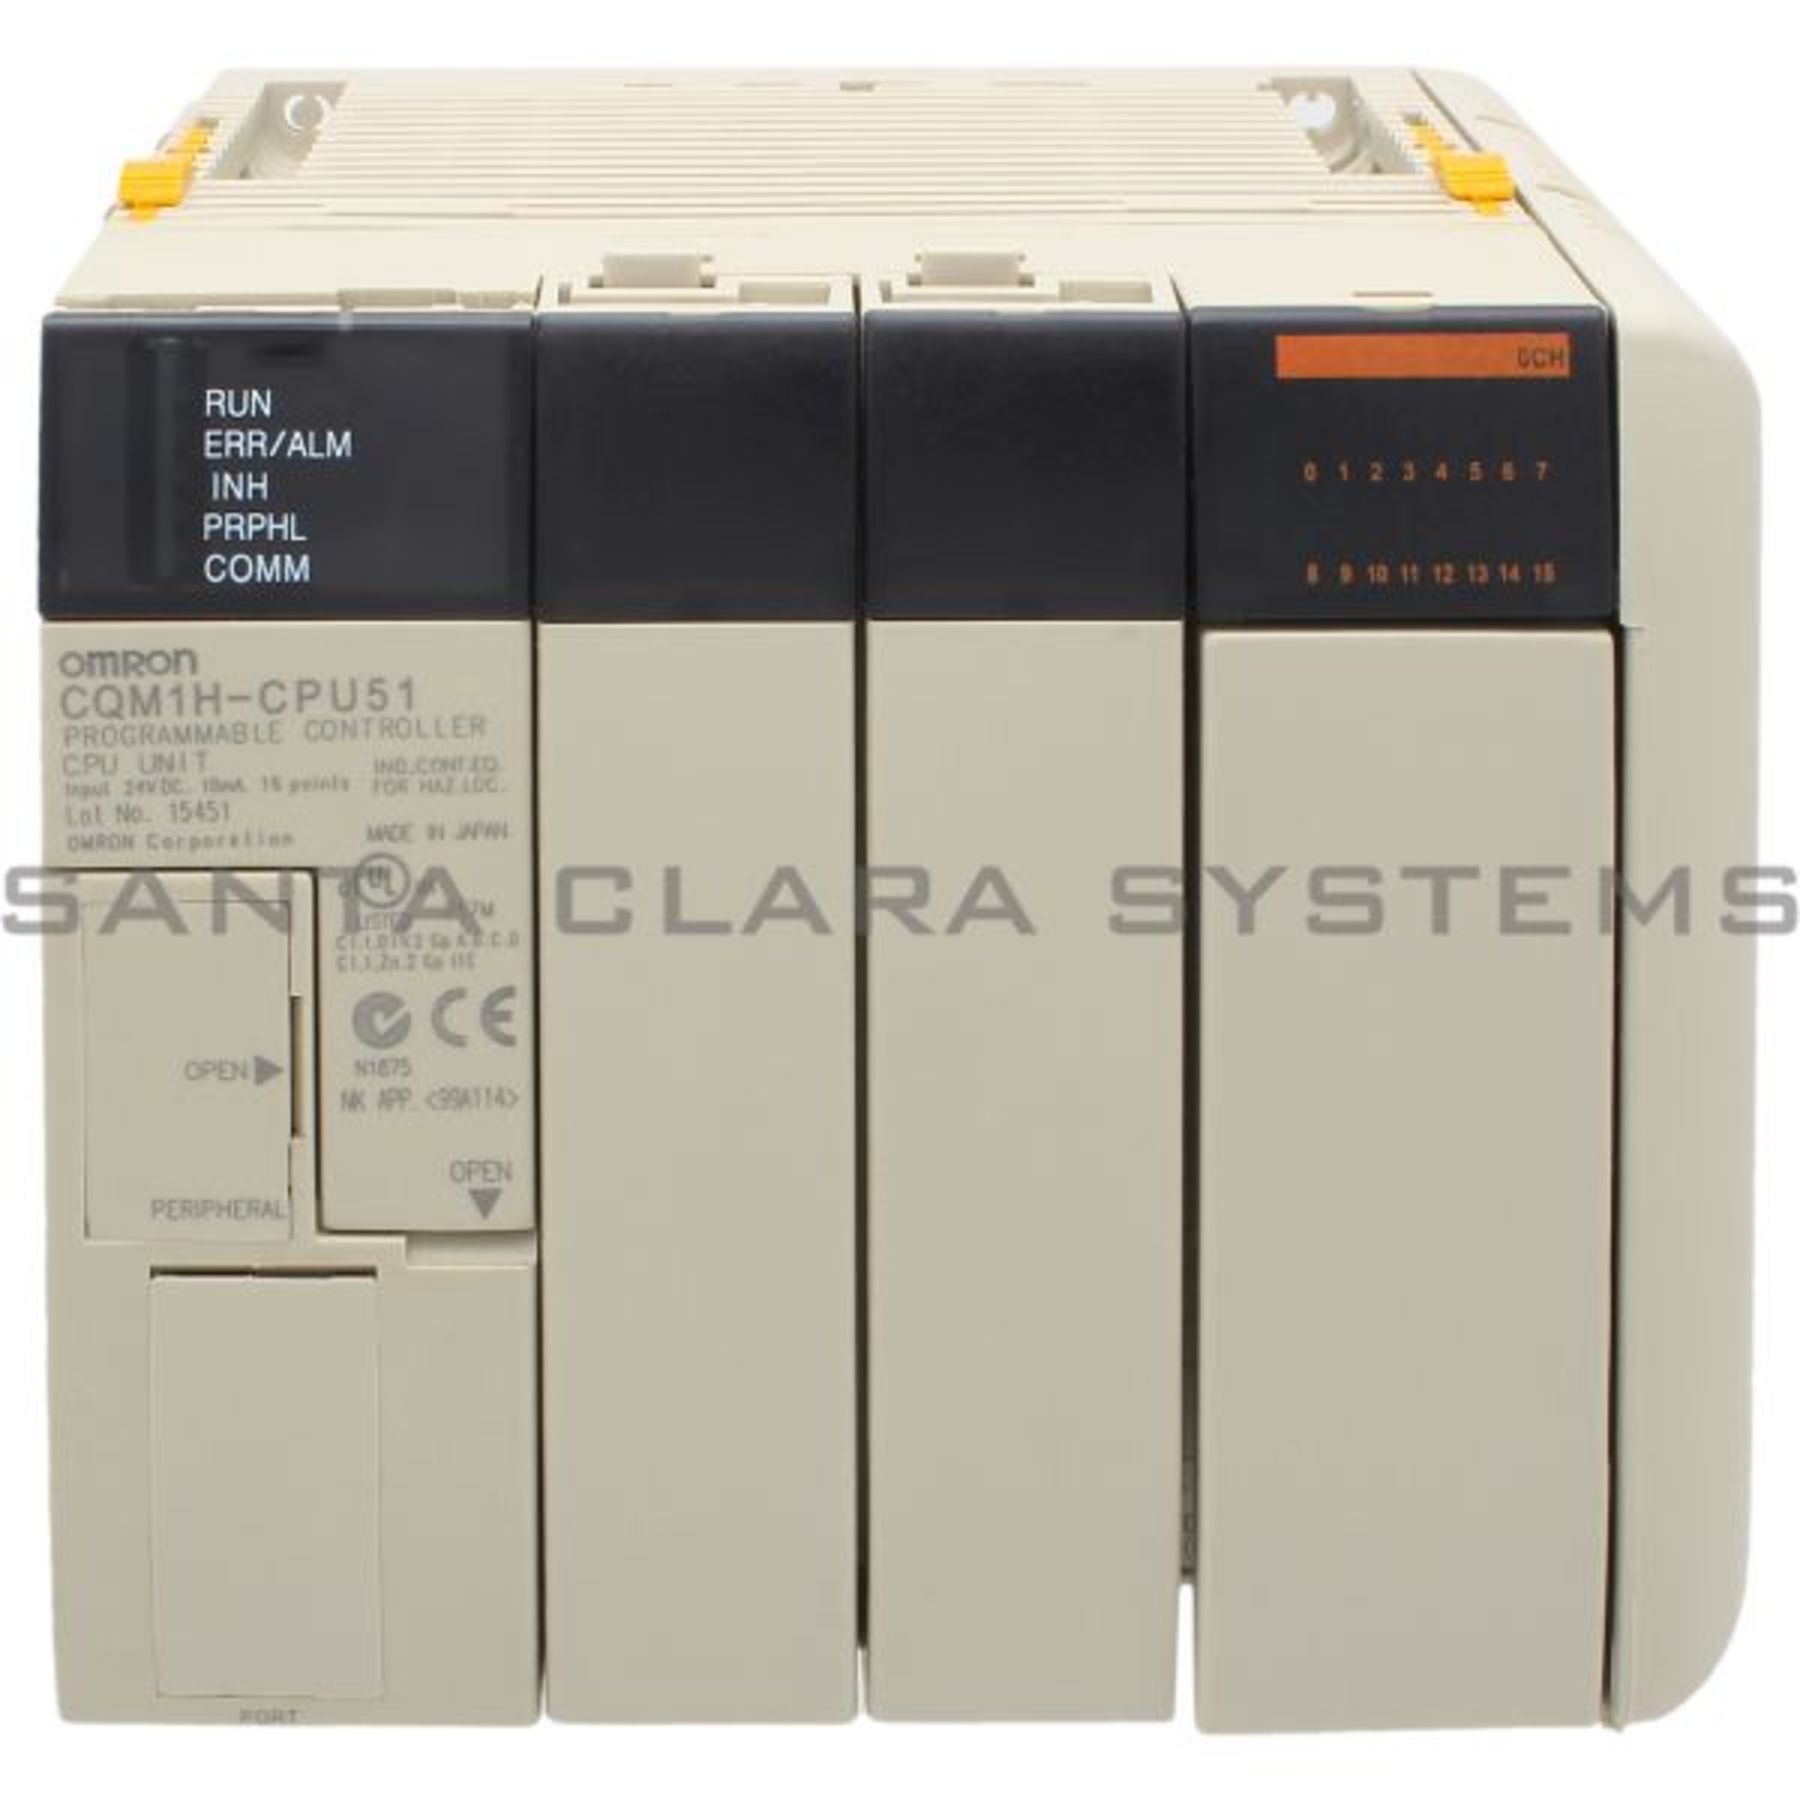 CQM1H-CPU51 Omron In stock and ready to ship - Santa Clara Systems